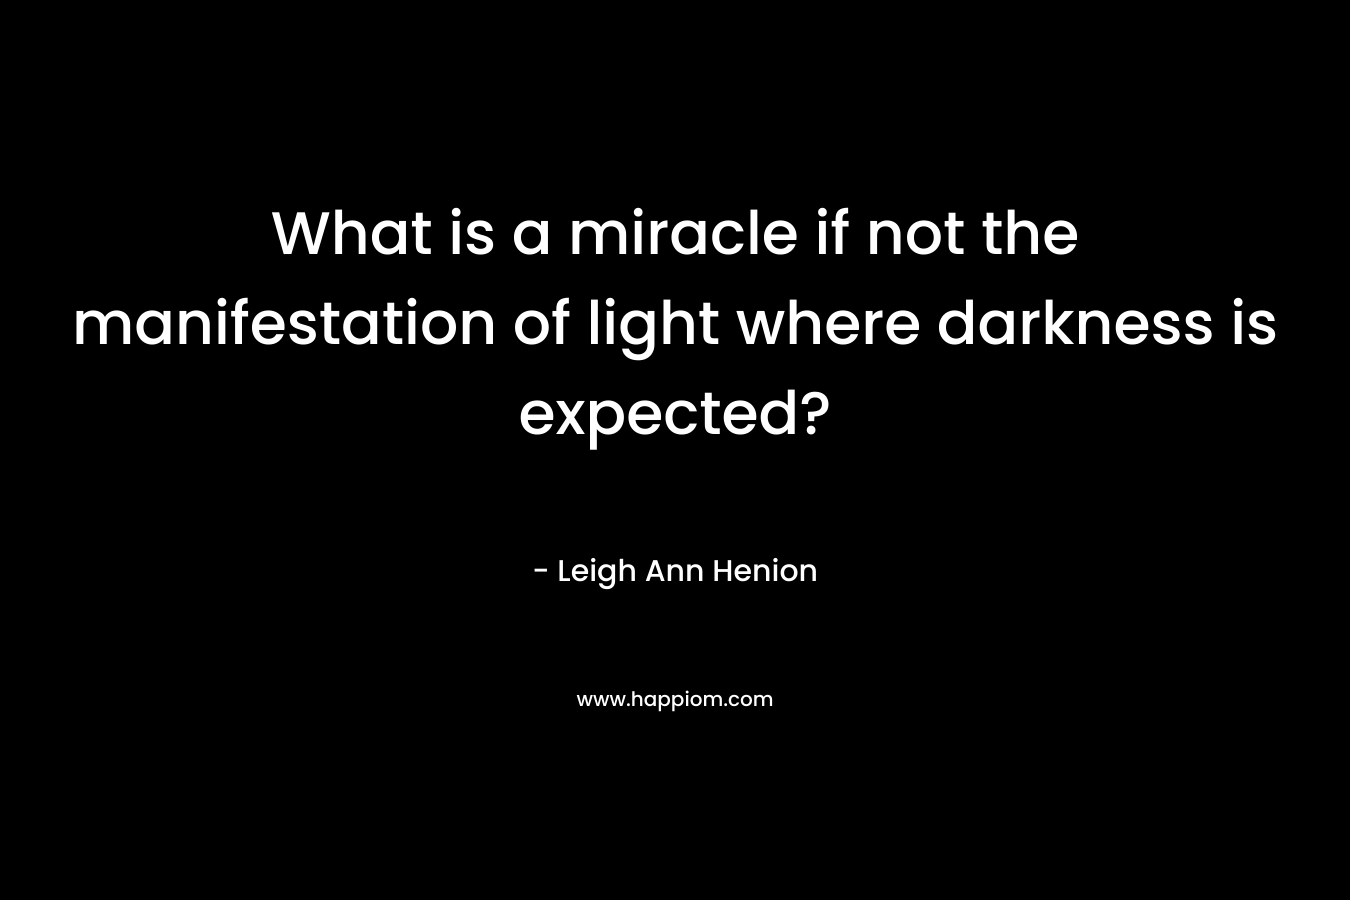 What is a miracle if not the manifestation of light where darkness is expected? – Leigh Ann Henion